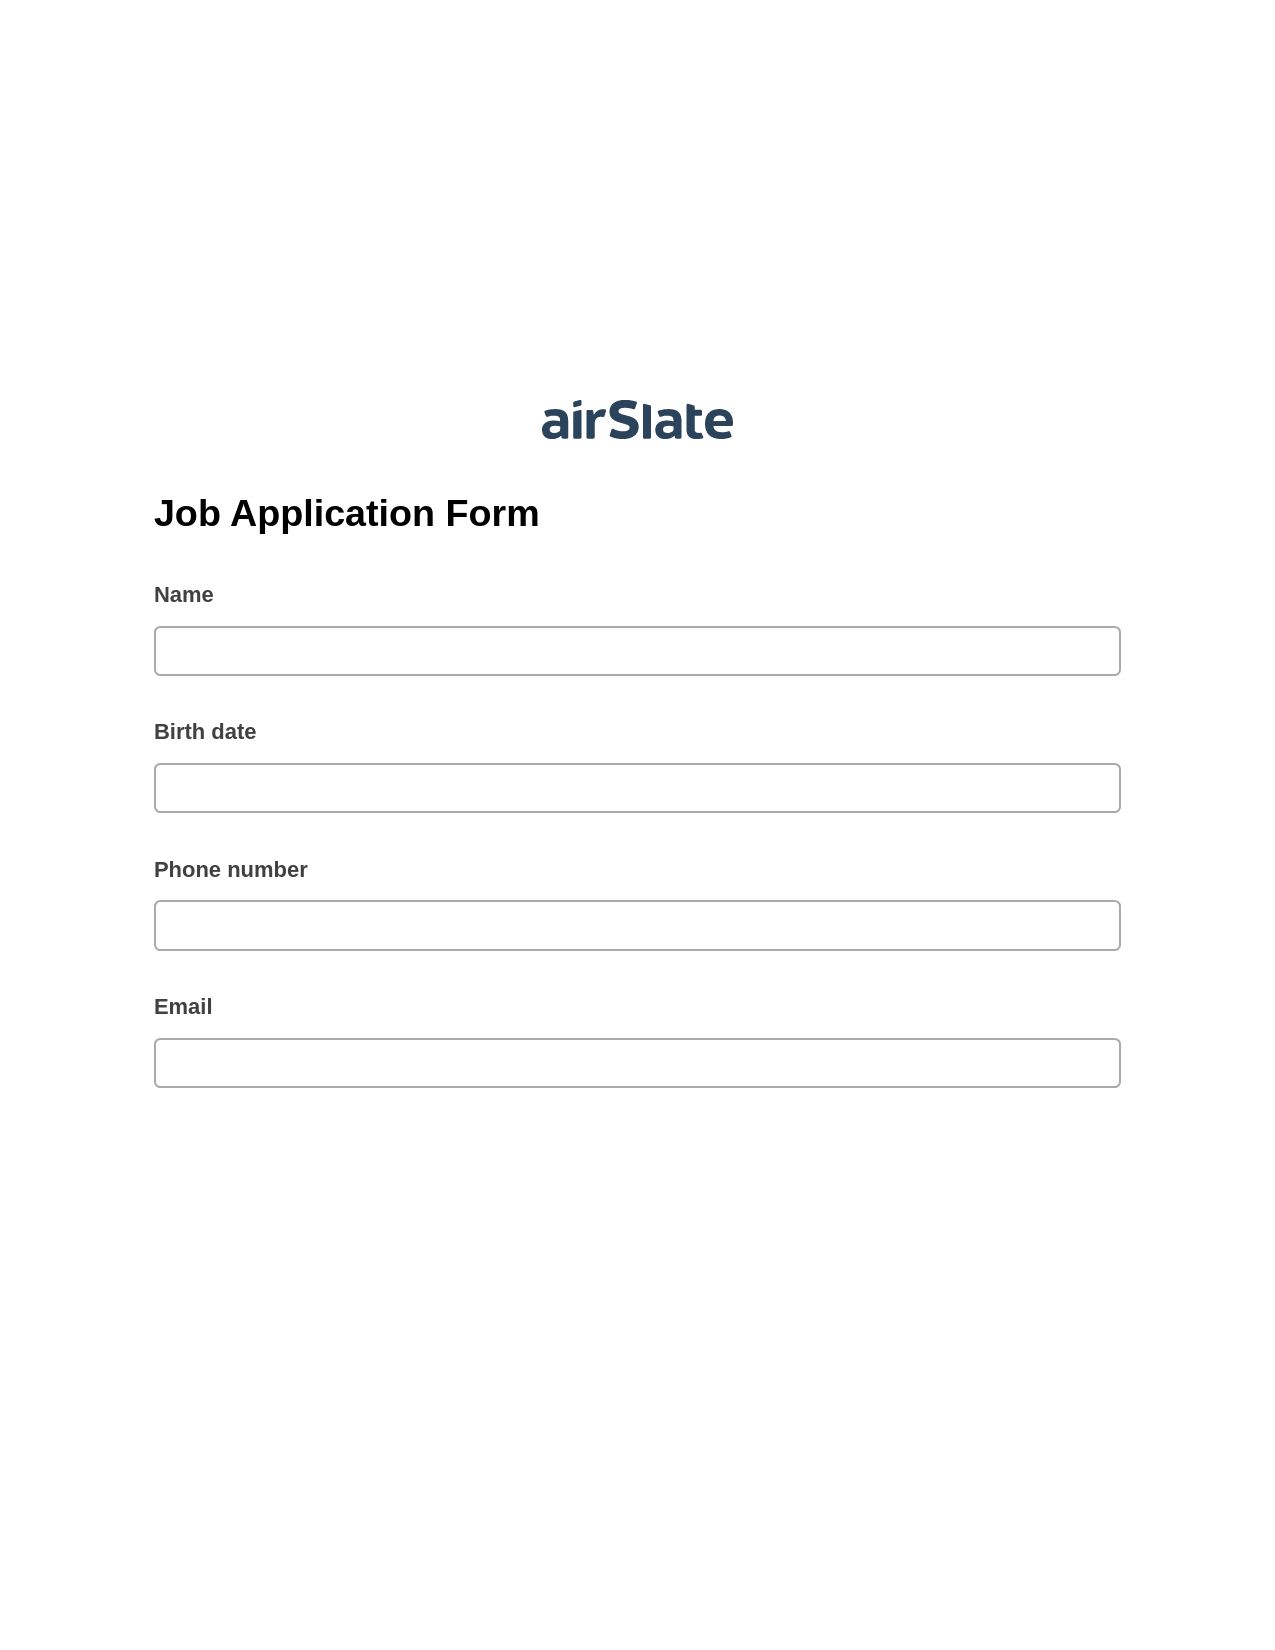 Job Application Form Pre-fill from NetSuite Records Bot, Webhook Bot, Export to NetSuite Record Bot